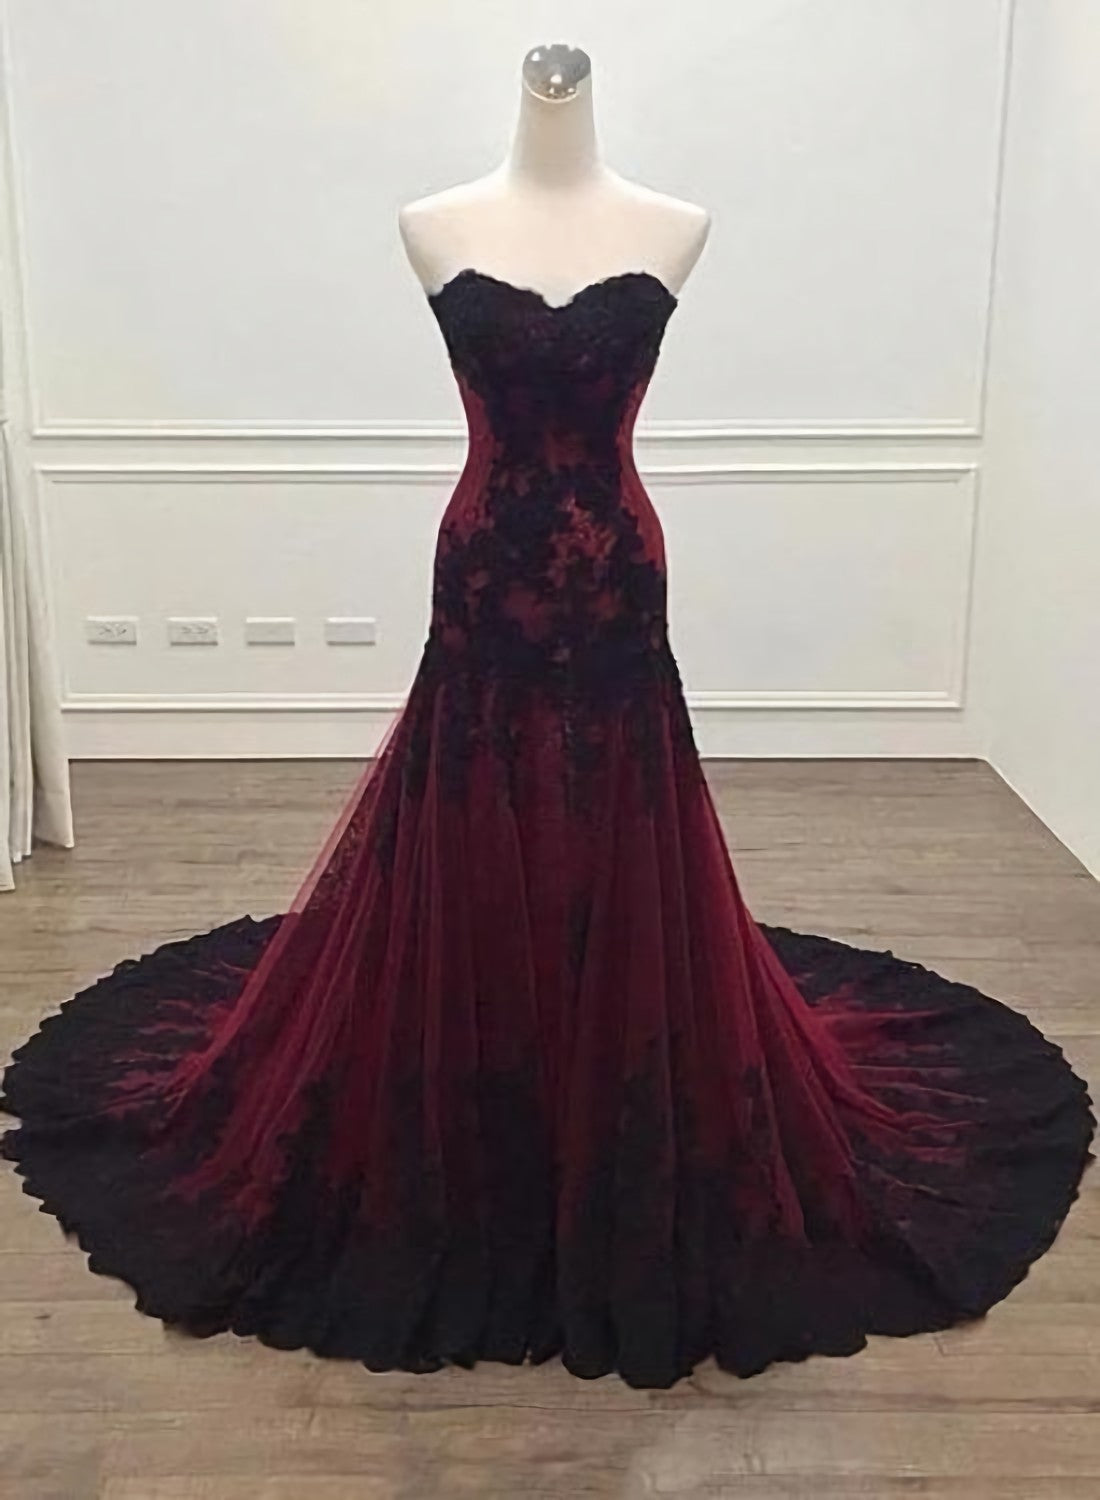 Party Dress Code, Black And Red Sweetheart Tulle With Lace Glam Evening Gown Party Dress, Long Formal Dress